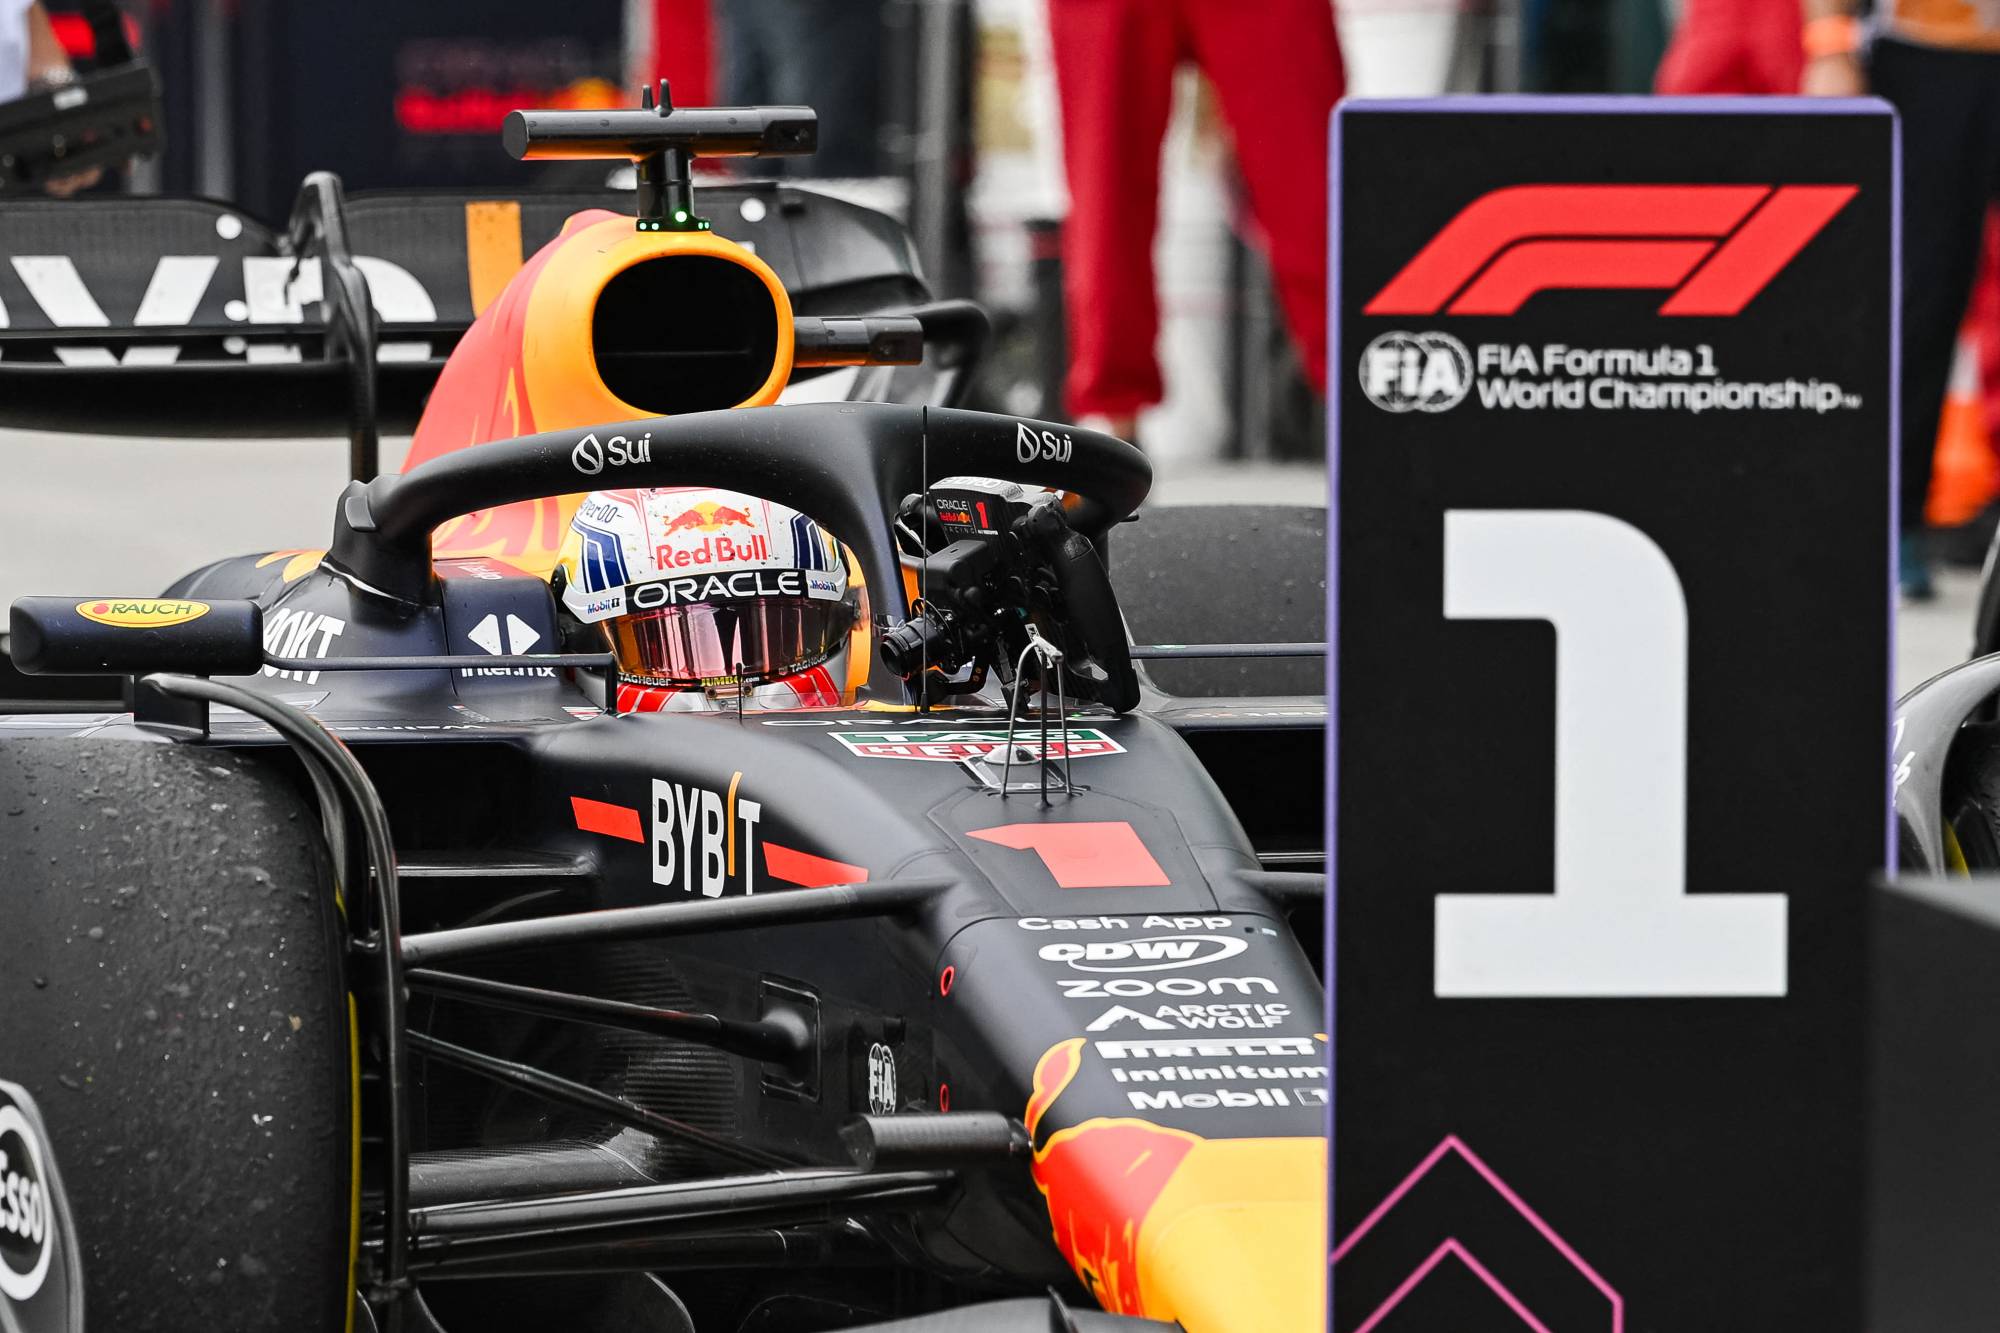 Red Bull can win everything, but the gap may be closing in Formula One ...